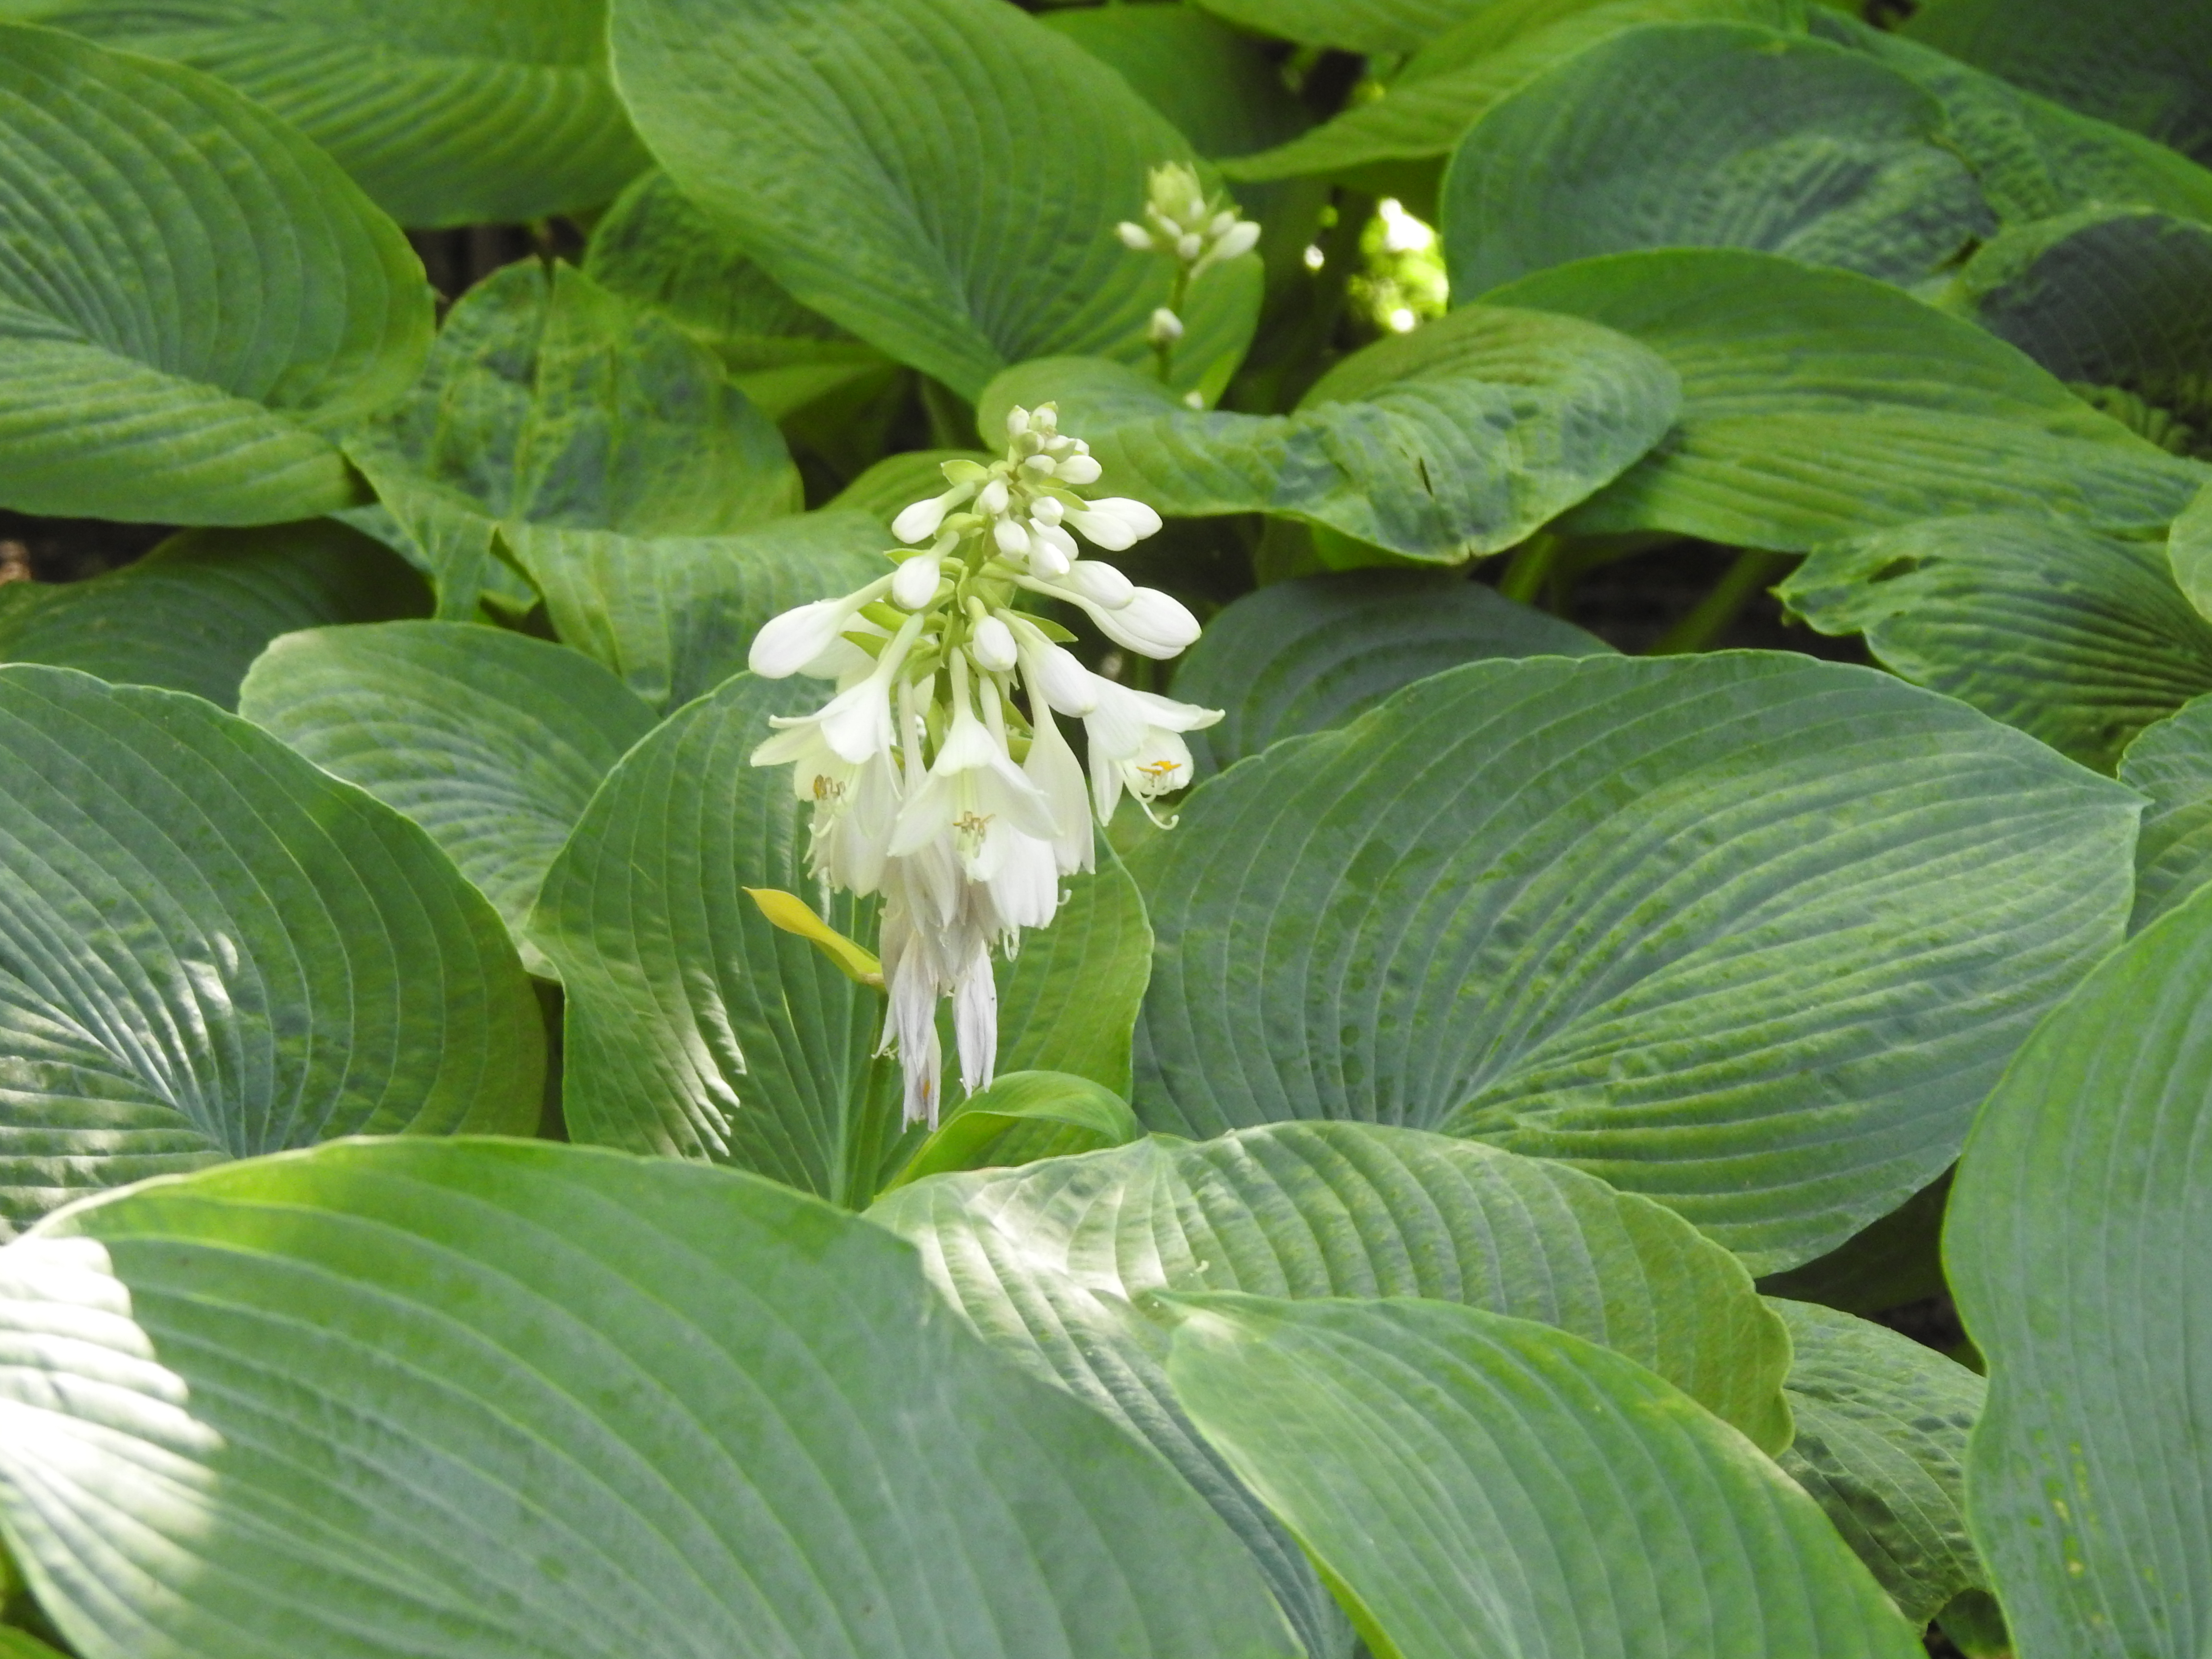 A plant with large, pointed green leaves and white flowers.